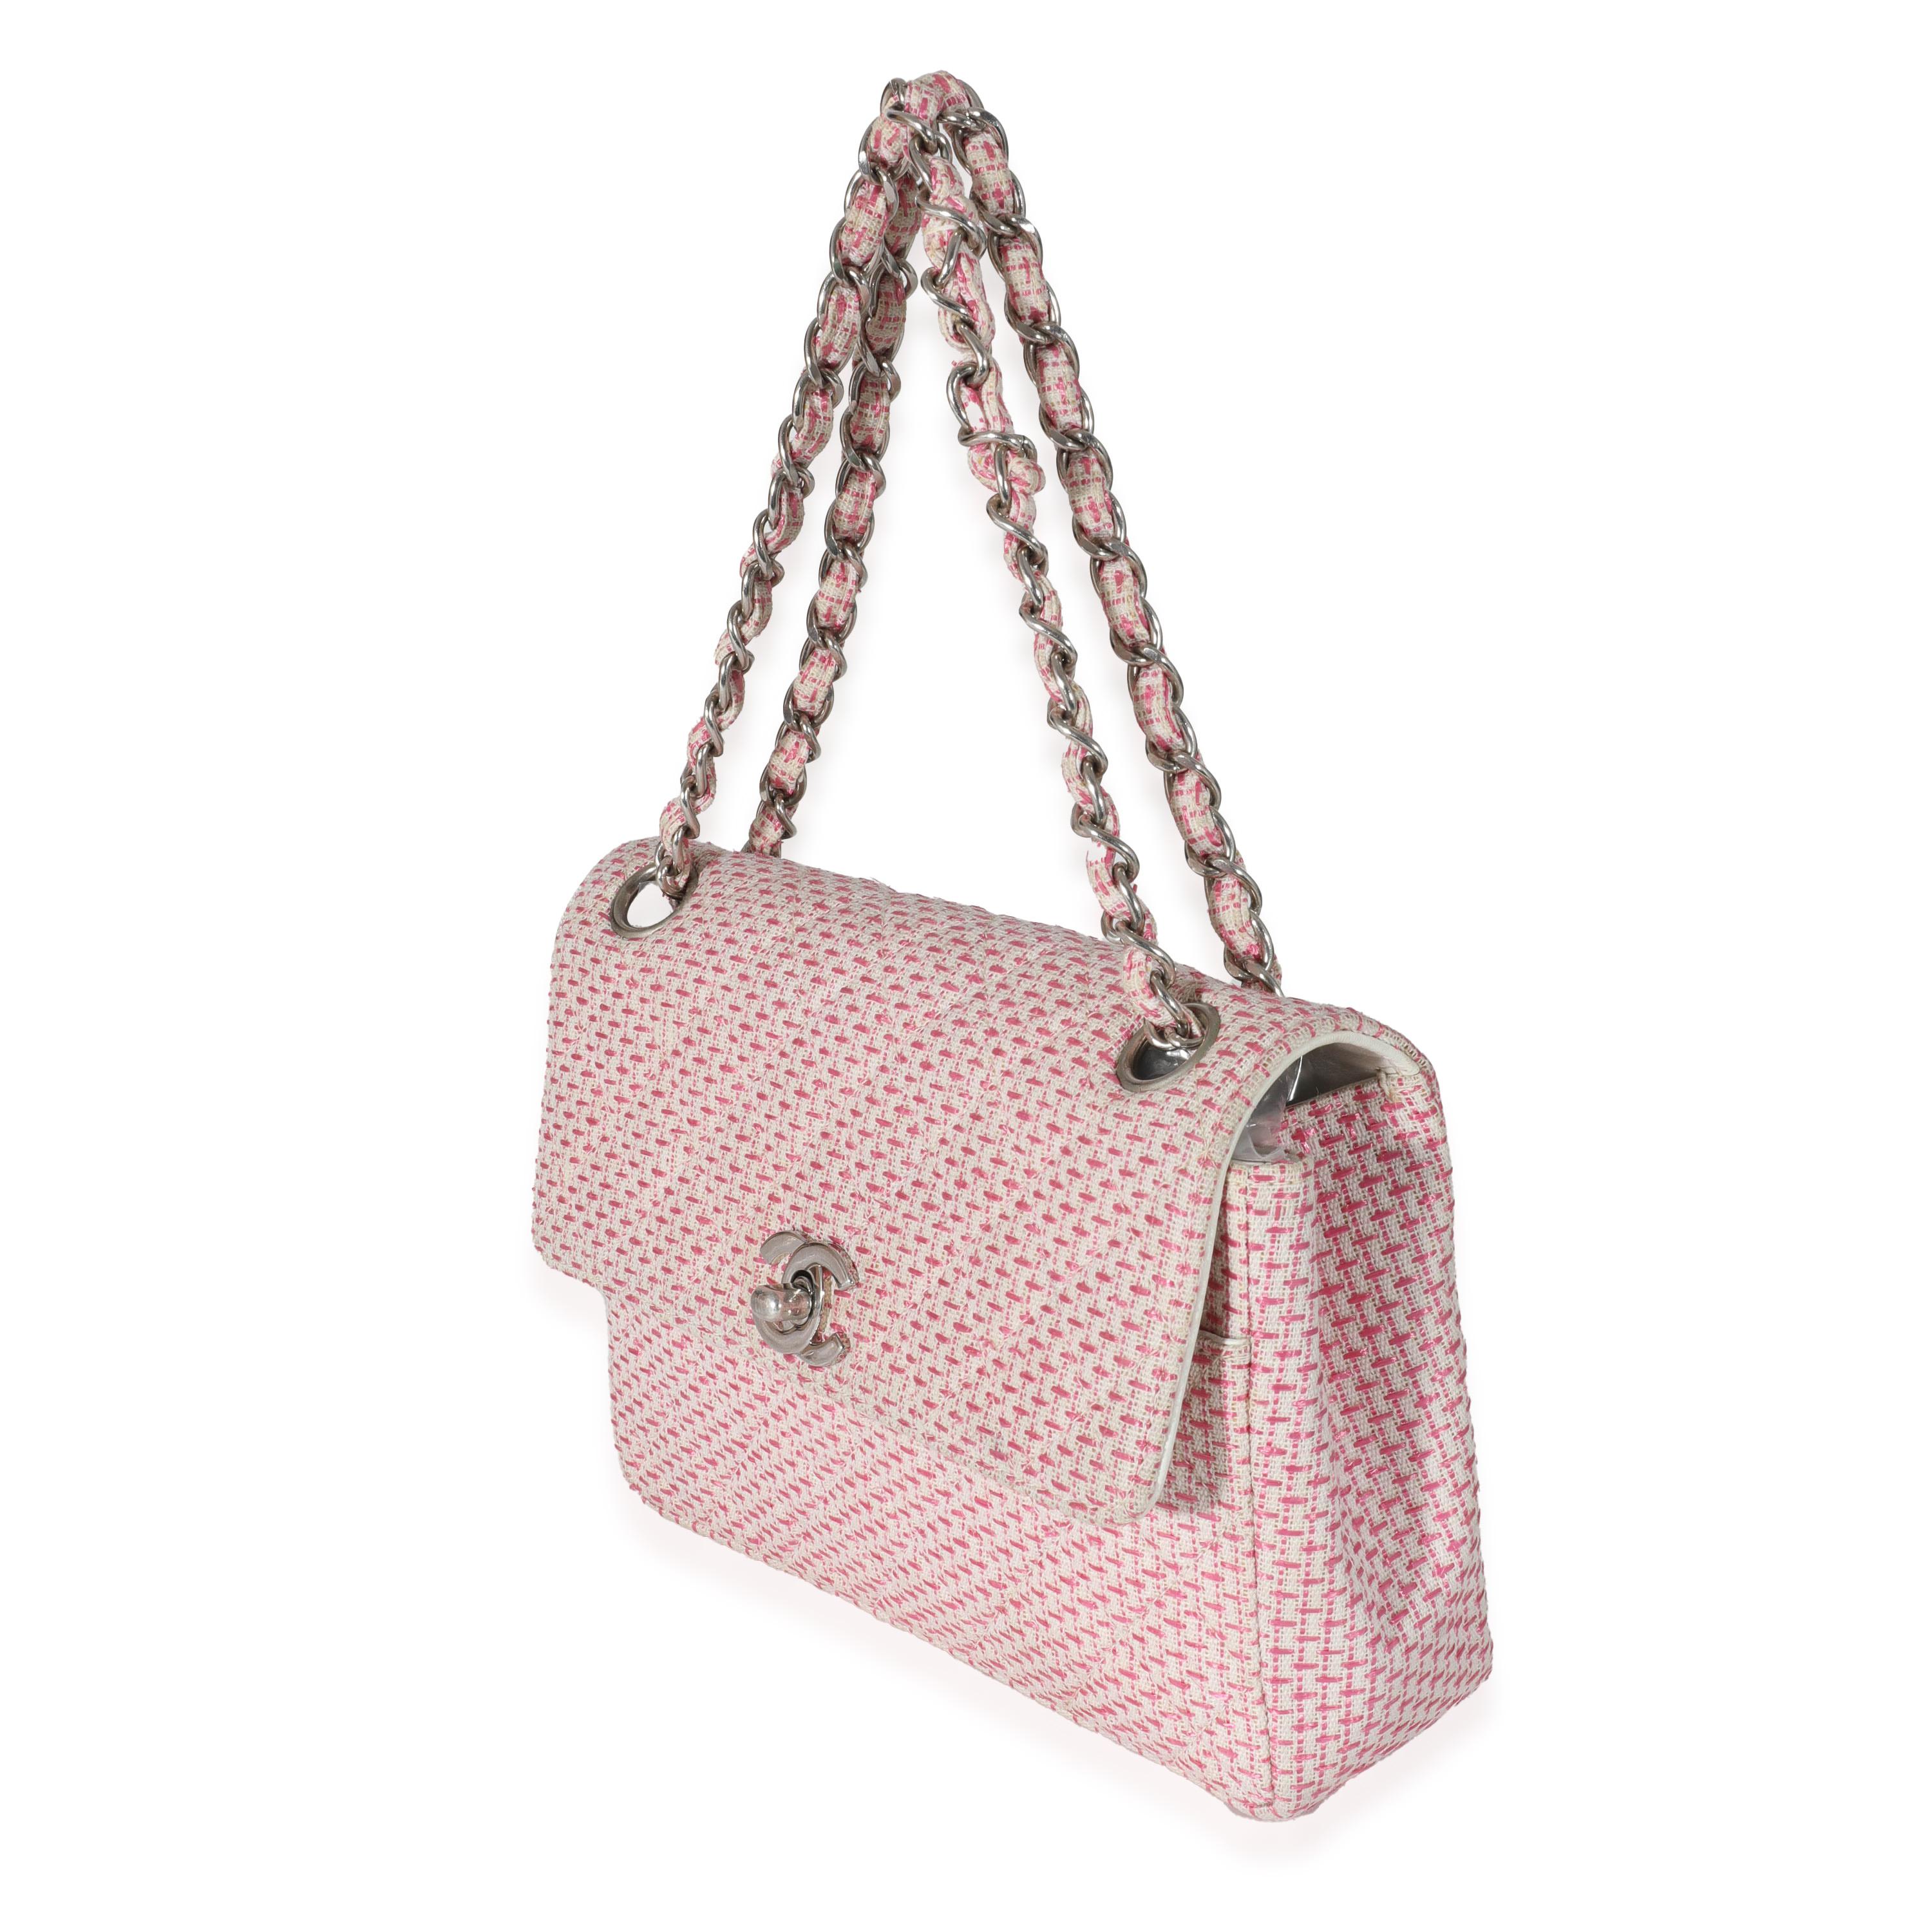 Chanel Woven Raffia Pink White Small CC Shoulder Flap Bag In Excellent Condition For Sale In New York, NY